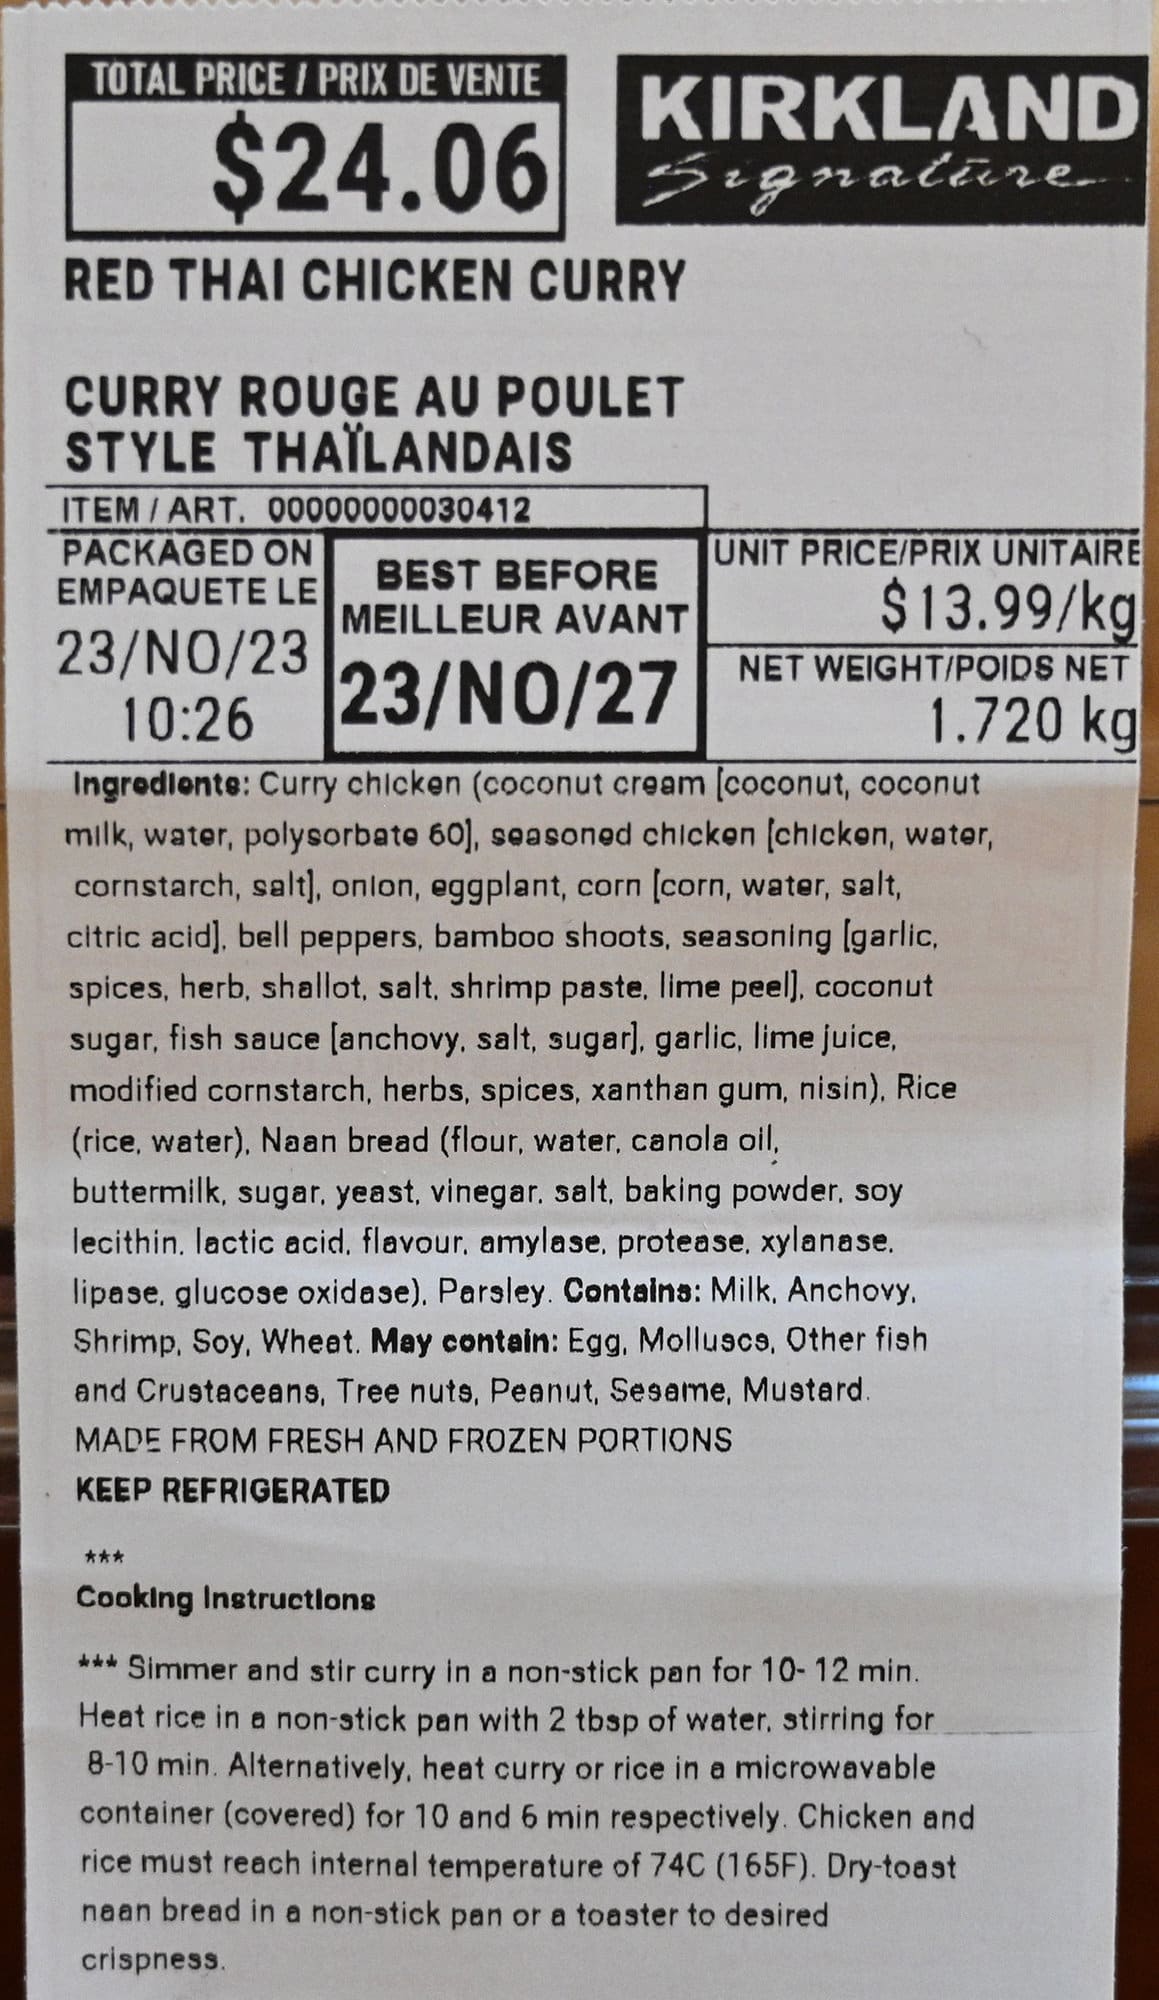 Closeup image of the front label on the curry showing cost, ingredients and cooking instructions.